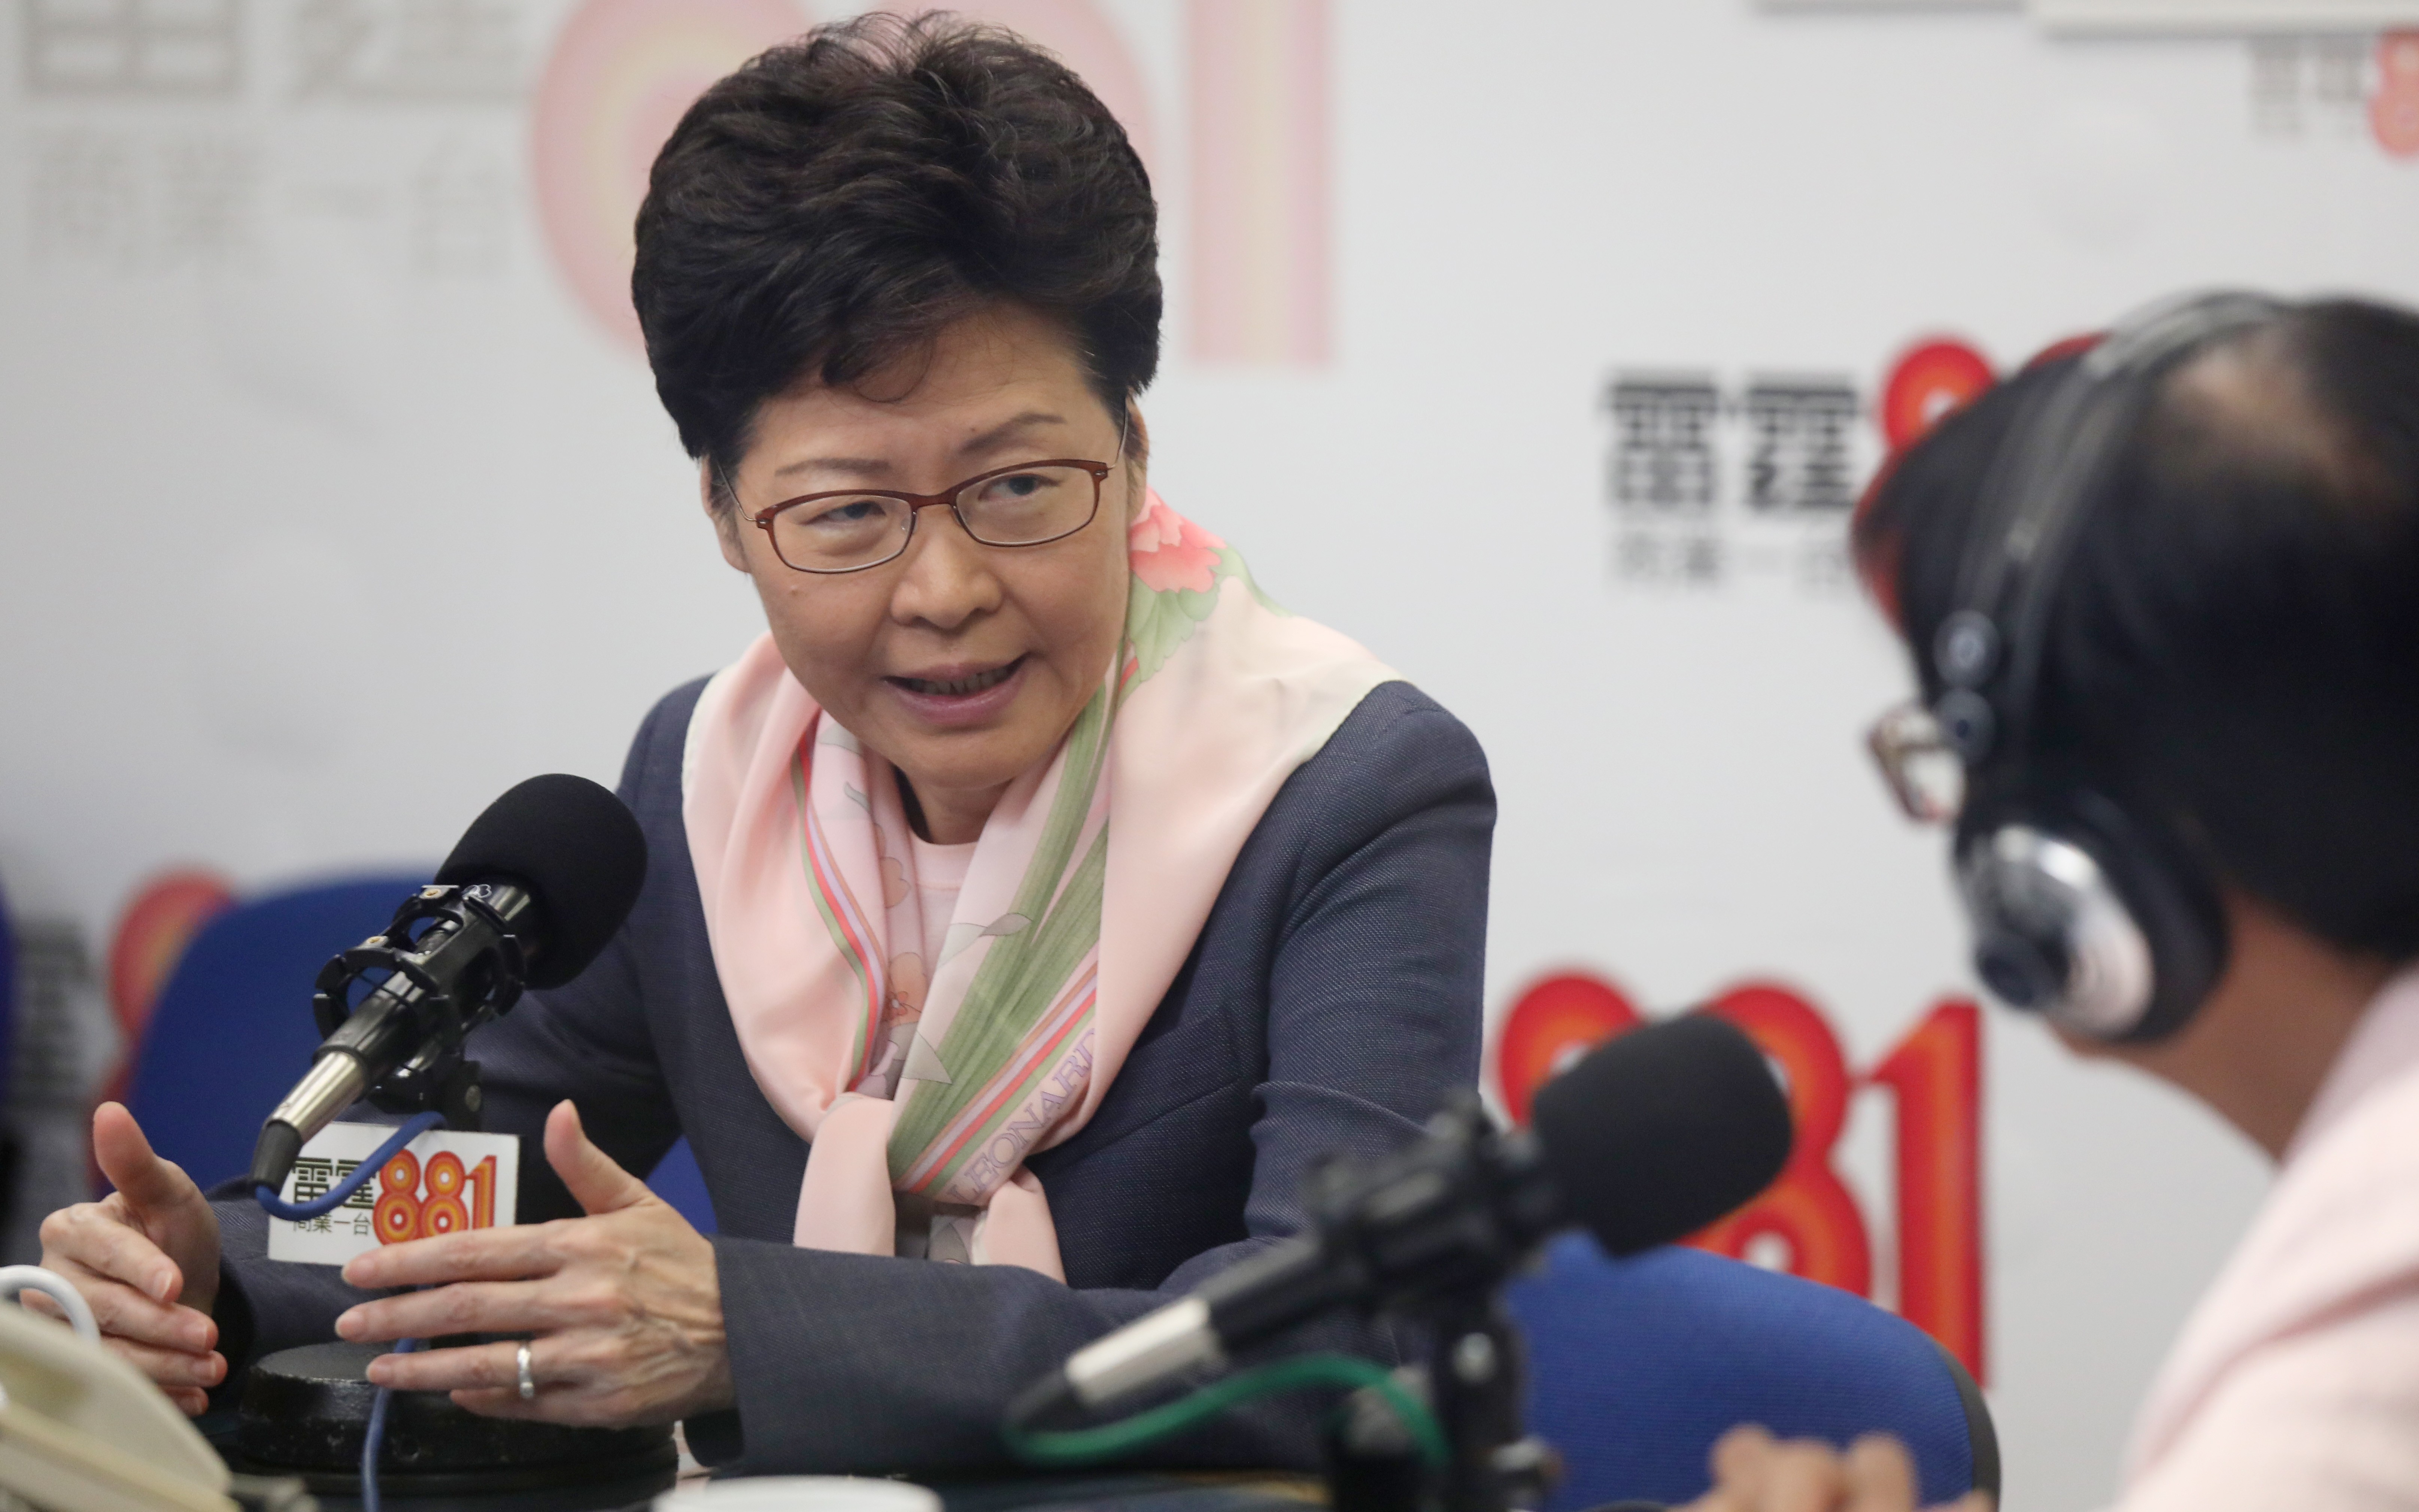 Carrie Lam insisted the government would not tolerate violent or unlawful acts by anyone. Photo: Xiaomei Chen